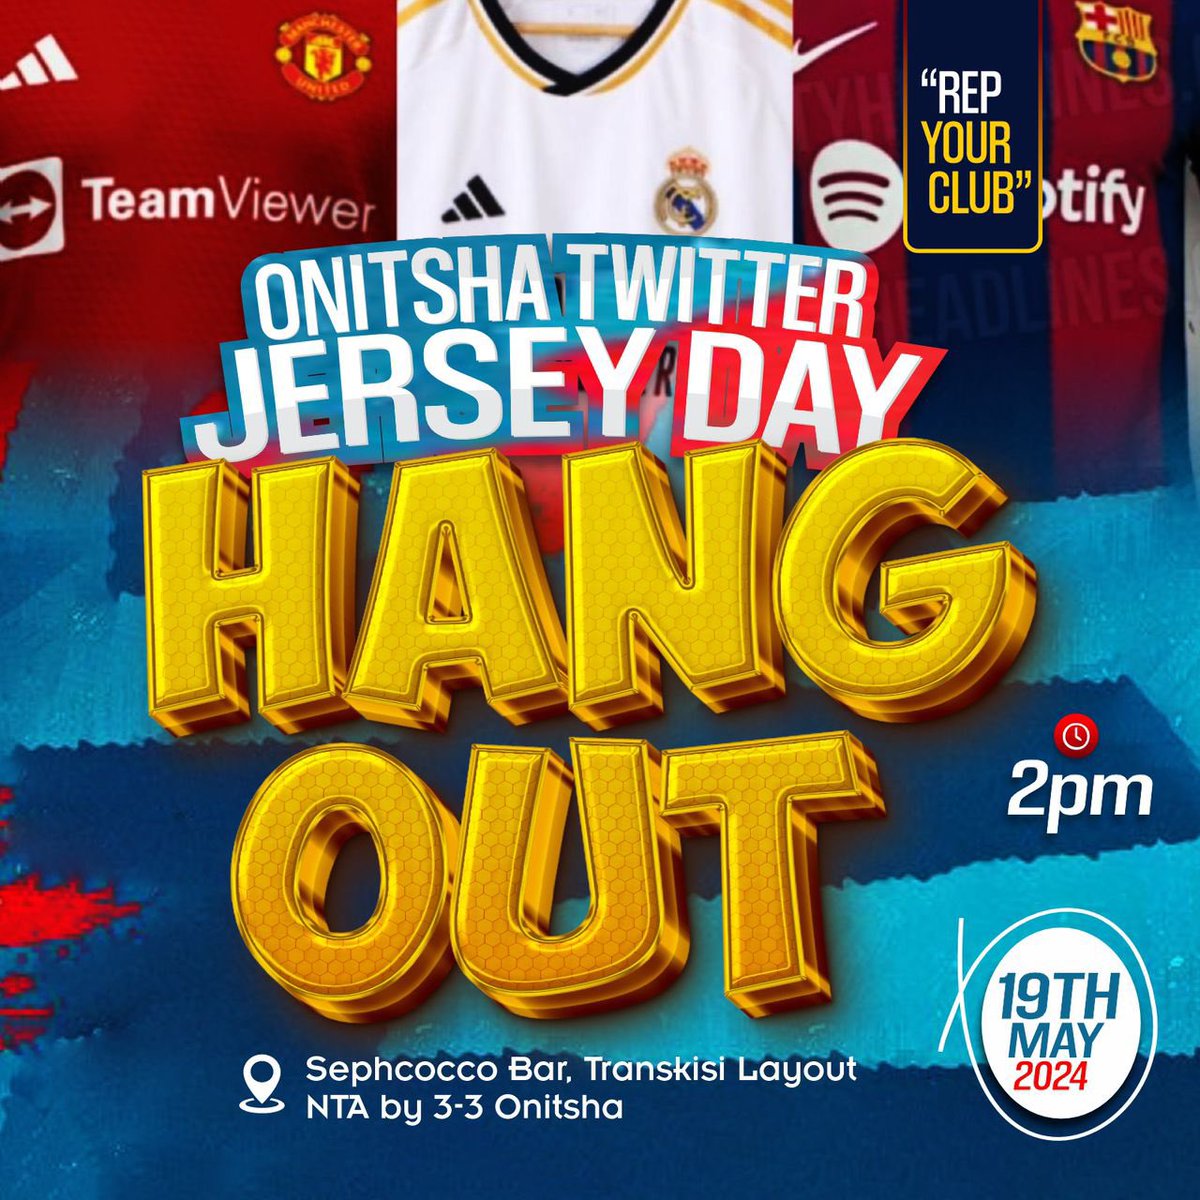 Count down to the biggest #RepYourClub hangout happening in Onitsha.
If you're not going to be here,
YOU'RE WRONG!!!!
Dear Anon, I need this Chelsea away jersey biko 🥺😔 
#OnitshaTwitterJerseyHangout
#OnitshaTwitterCommunity